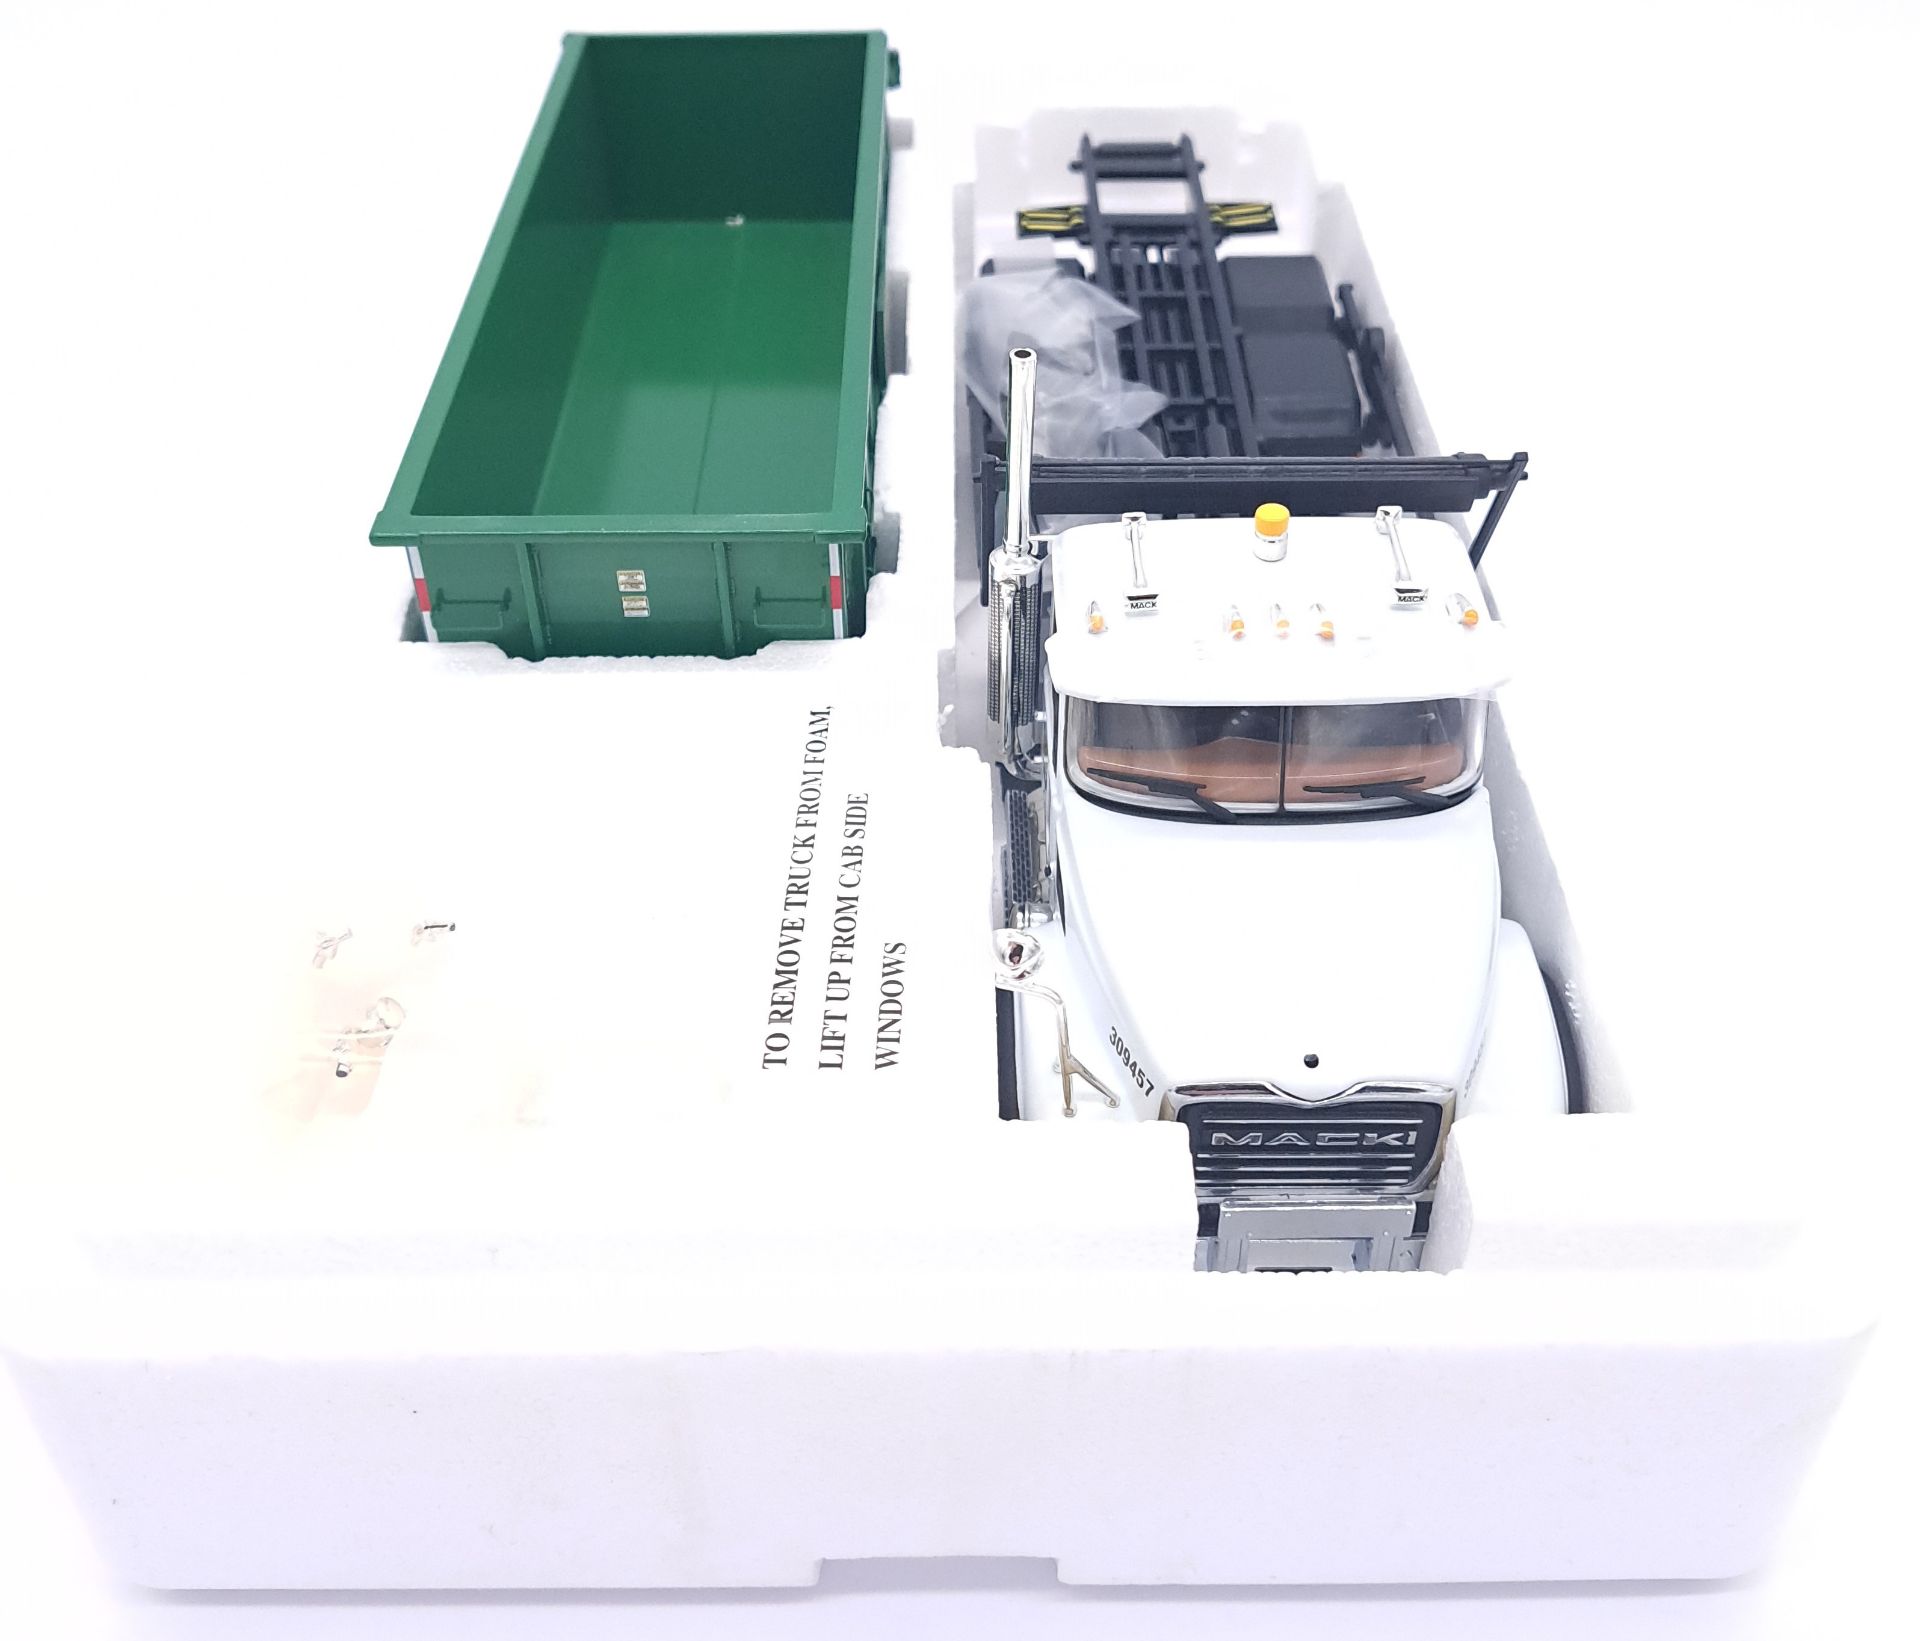 First Gear, a boxed 1:34 scale Roll-Off Refuse Truck "WM Waste Management" - Image 3 of 5